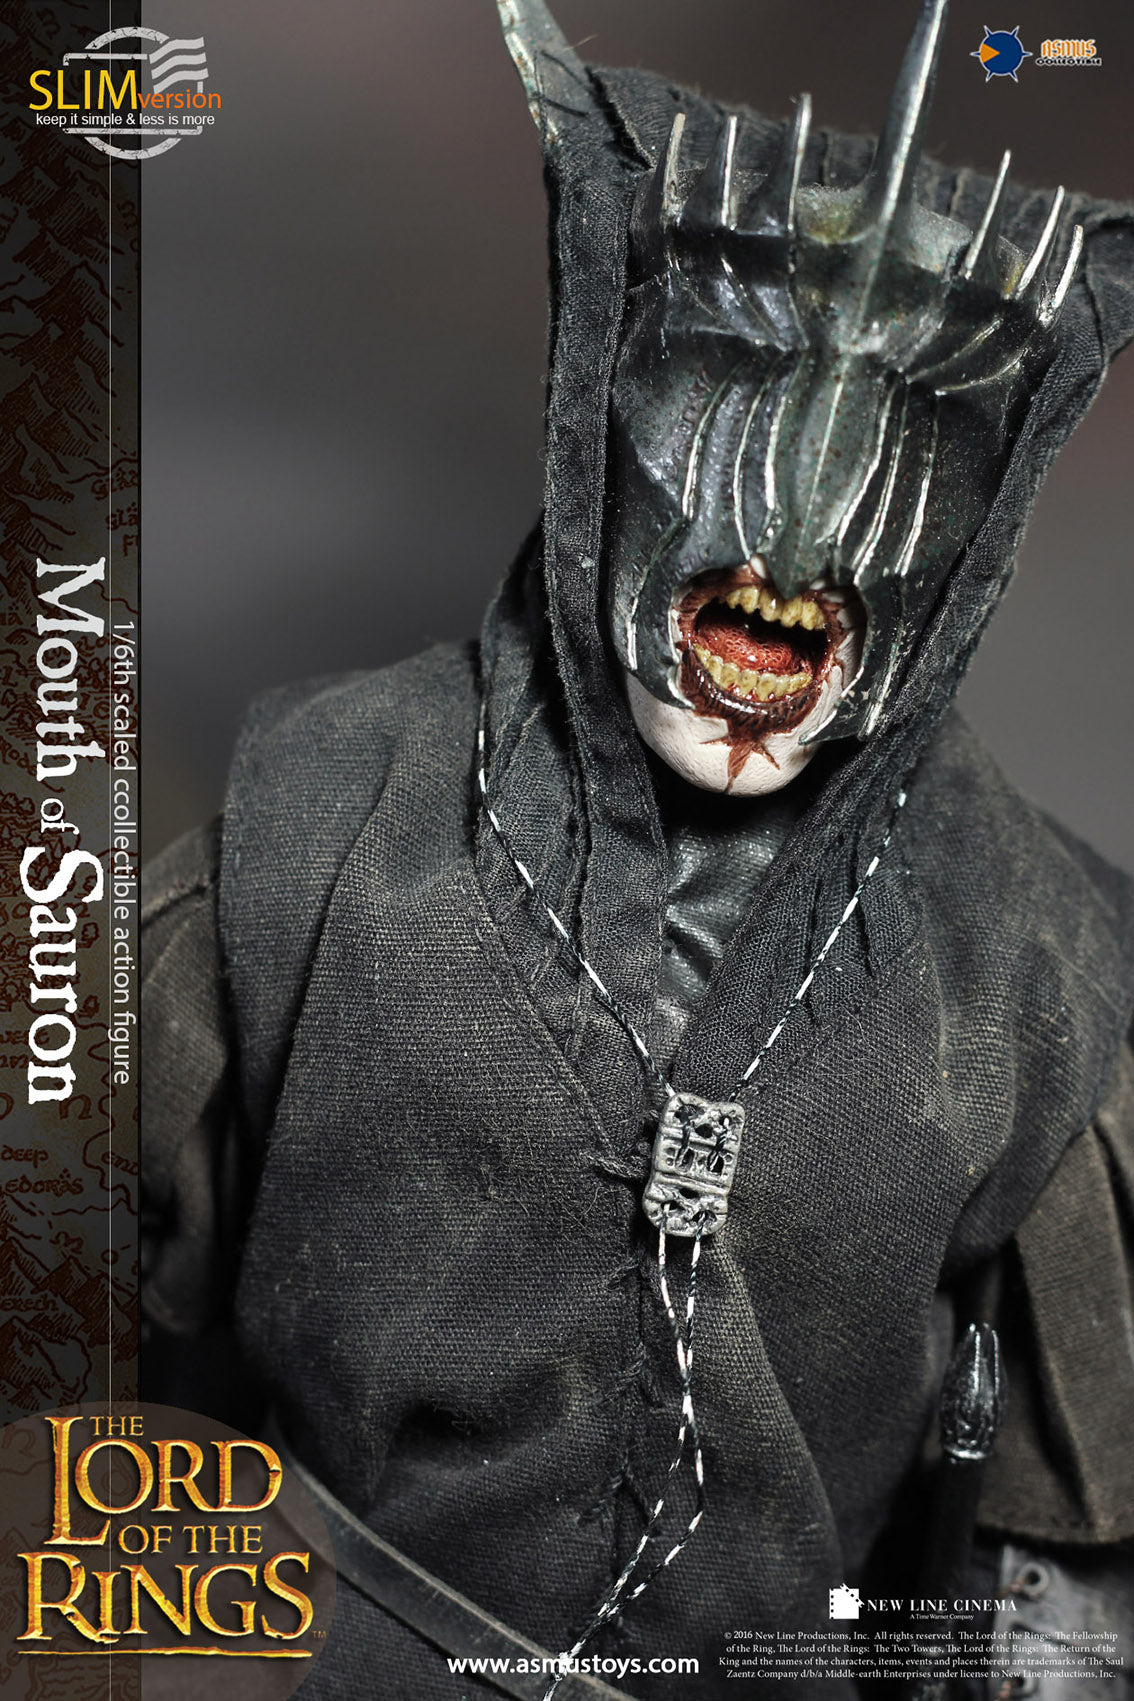 Asmus Toys - Heroes of Middle-Earth - The Lord of the Rings - Mouth of Sauron (1/6 Scale) - Marvelous Toys